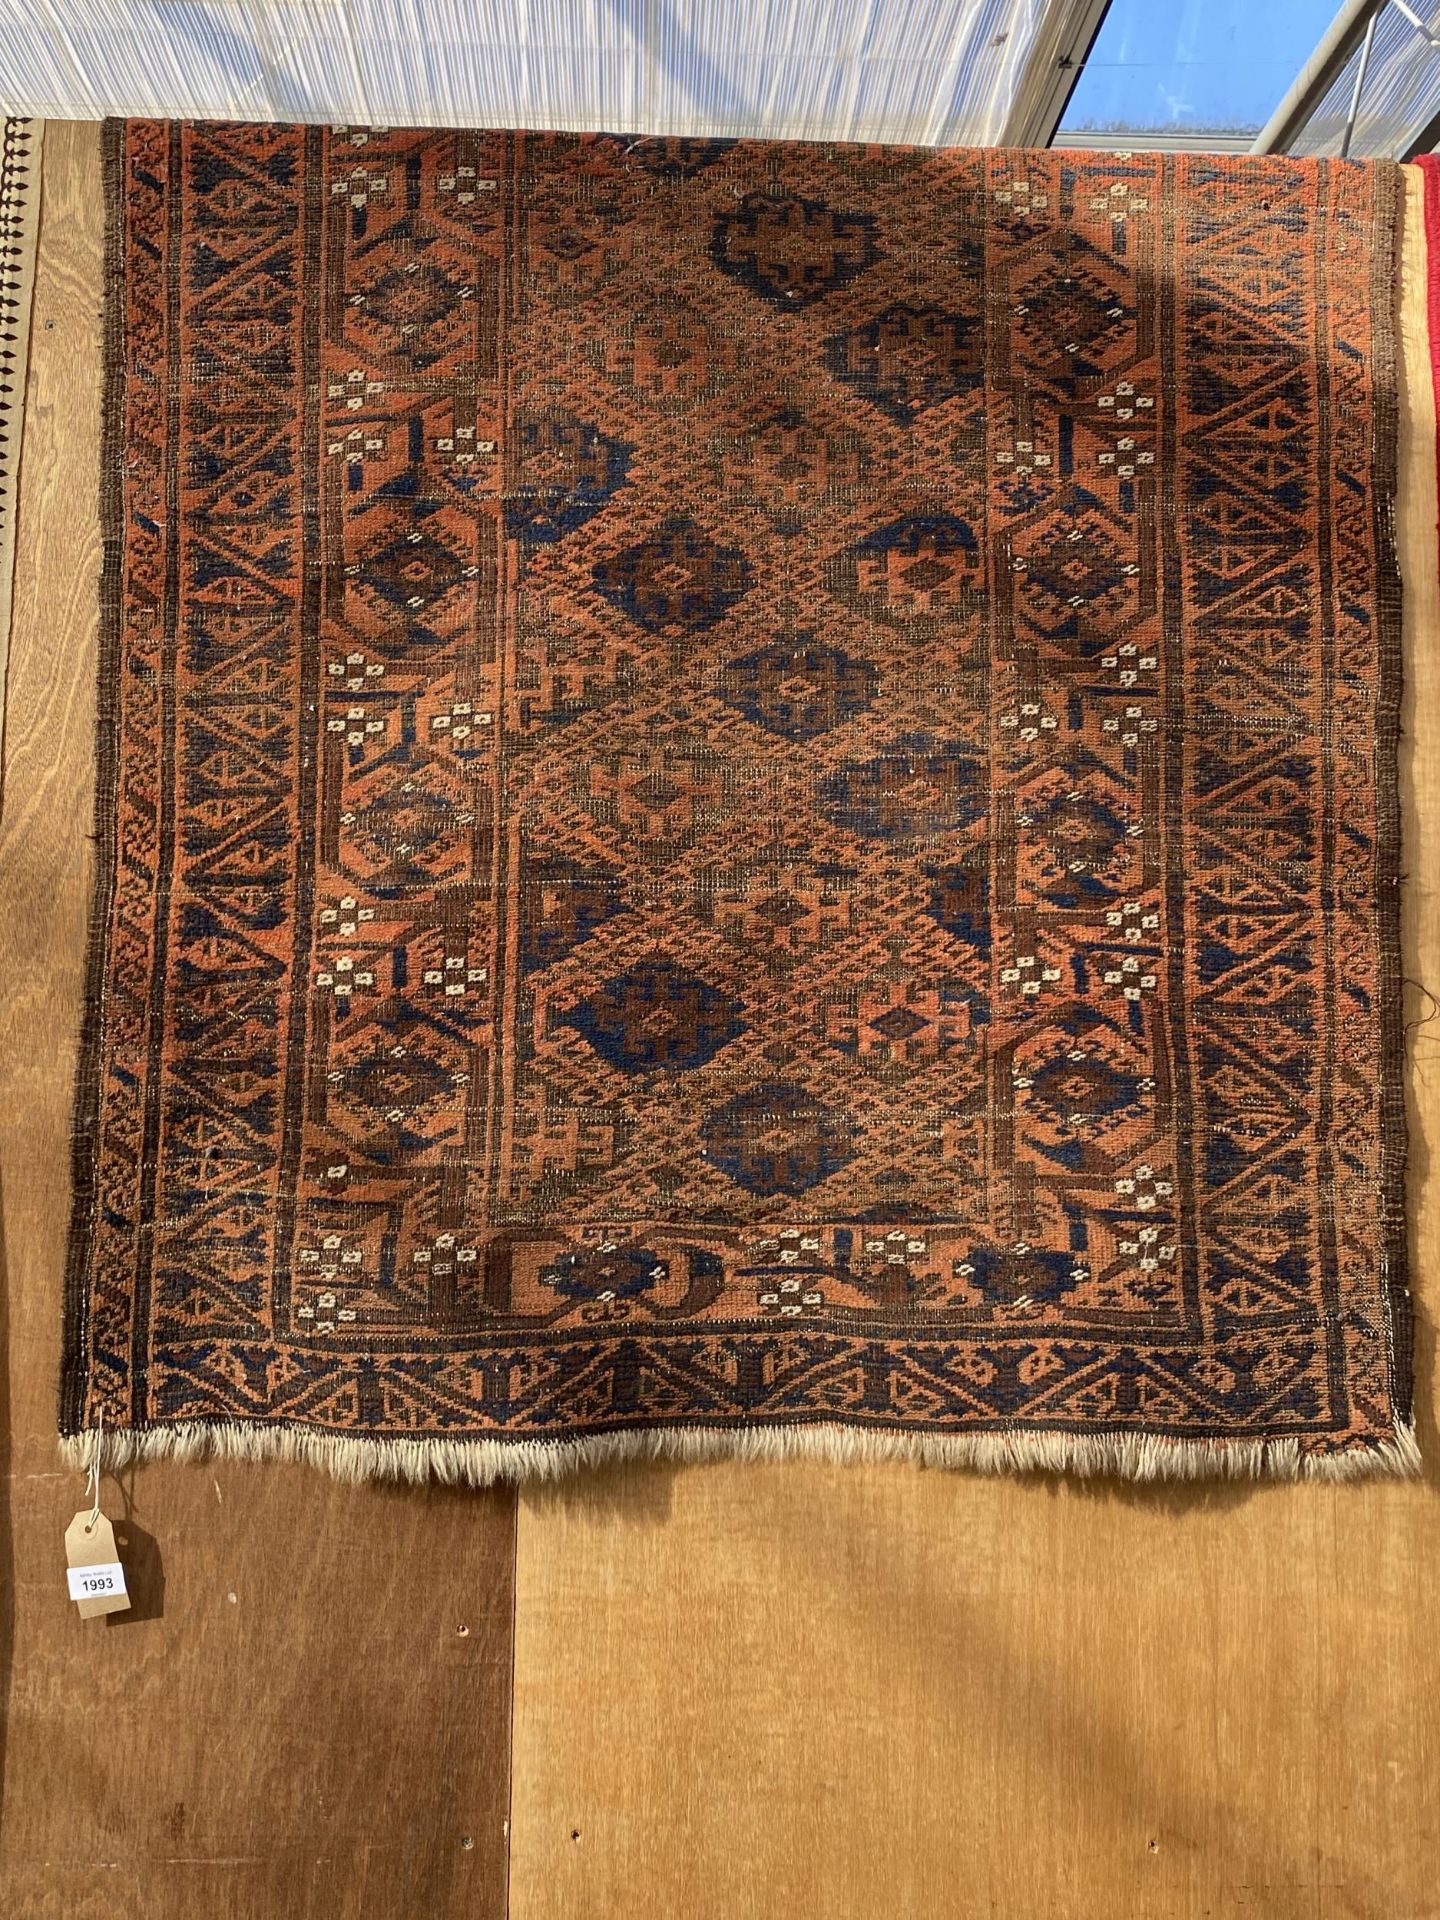 AN ORANAGE AND BLUE PATTERNED RUG